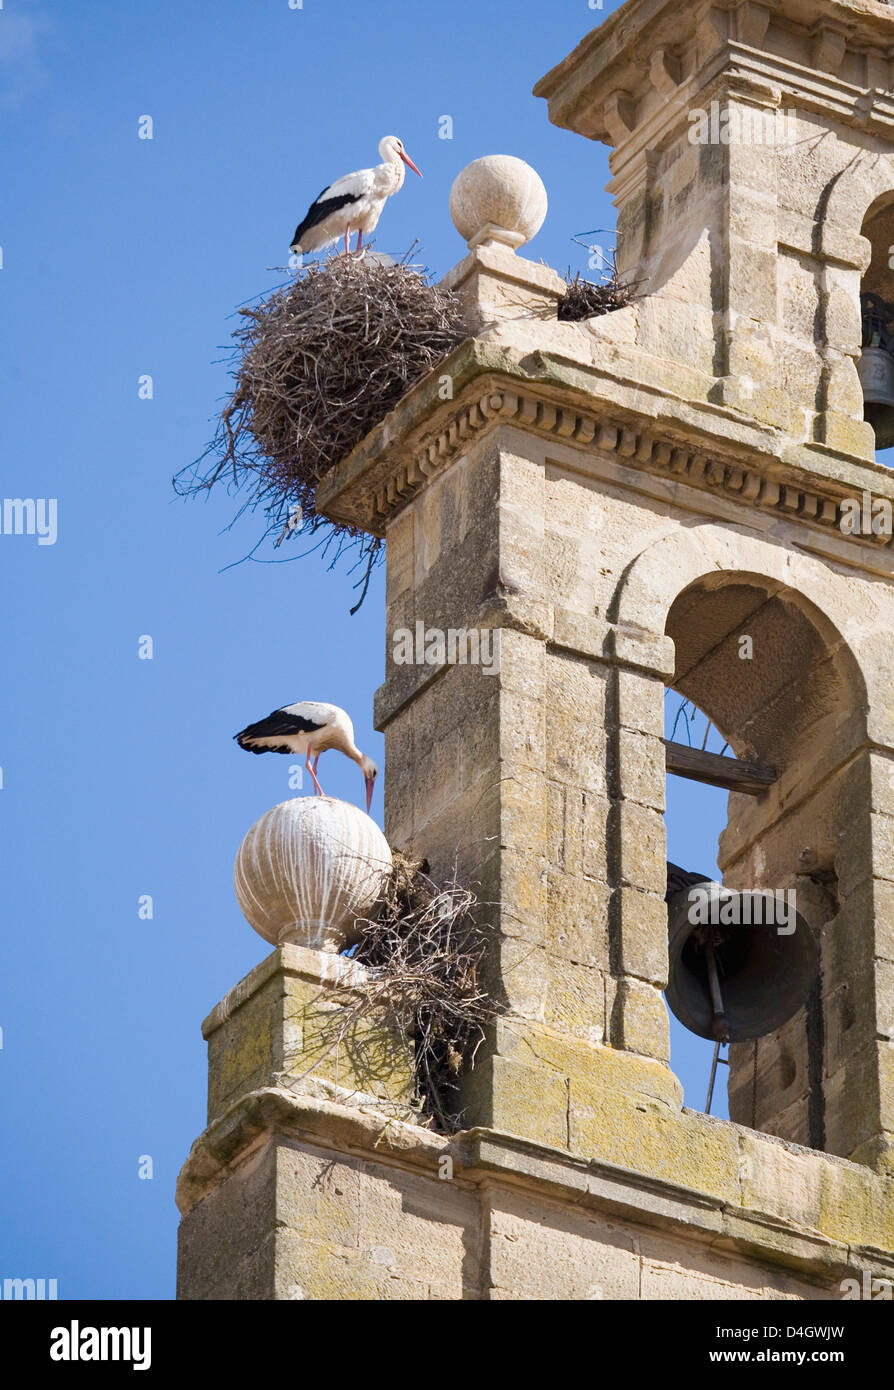 Two European white storks, and their nests on a convent bell tower, against a blue sky, Santo Domingo, La Rioja, Spain Stock Photo